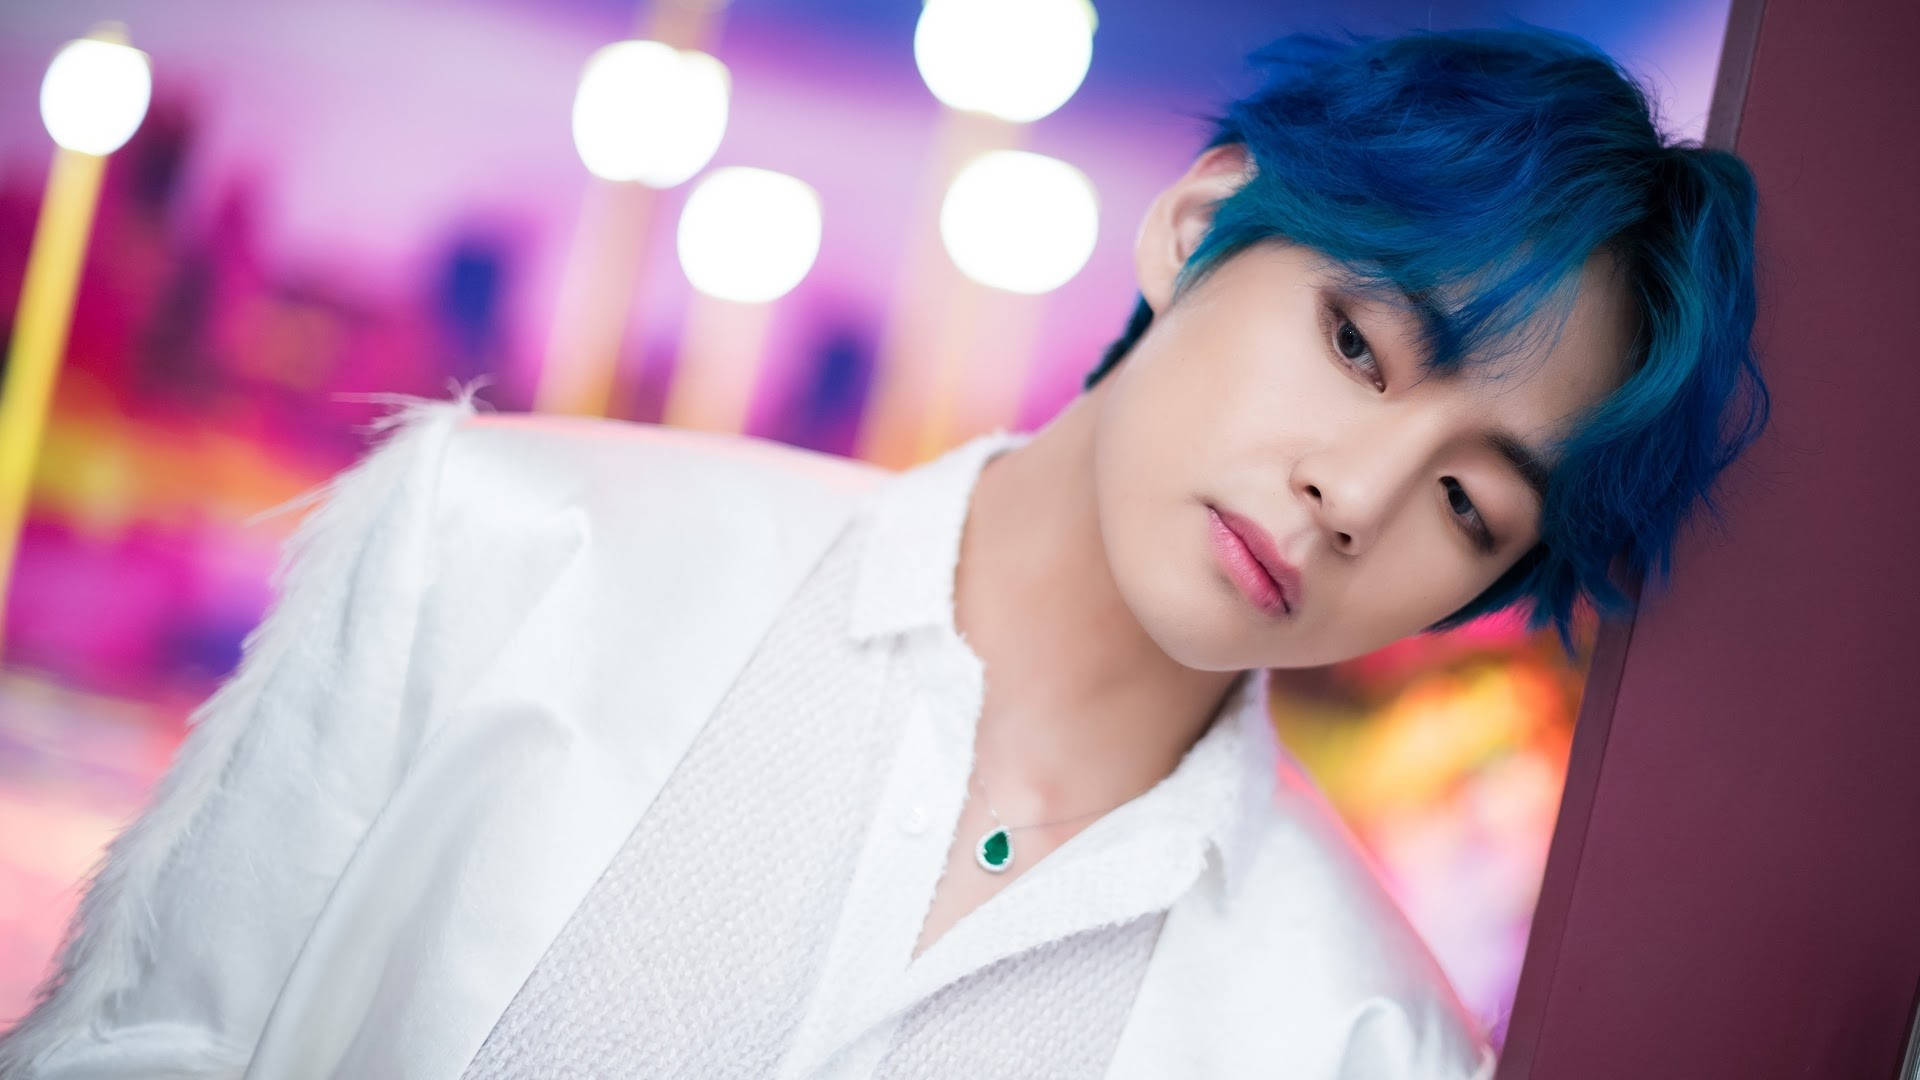 Boy With Luv Taehyung Background